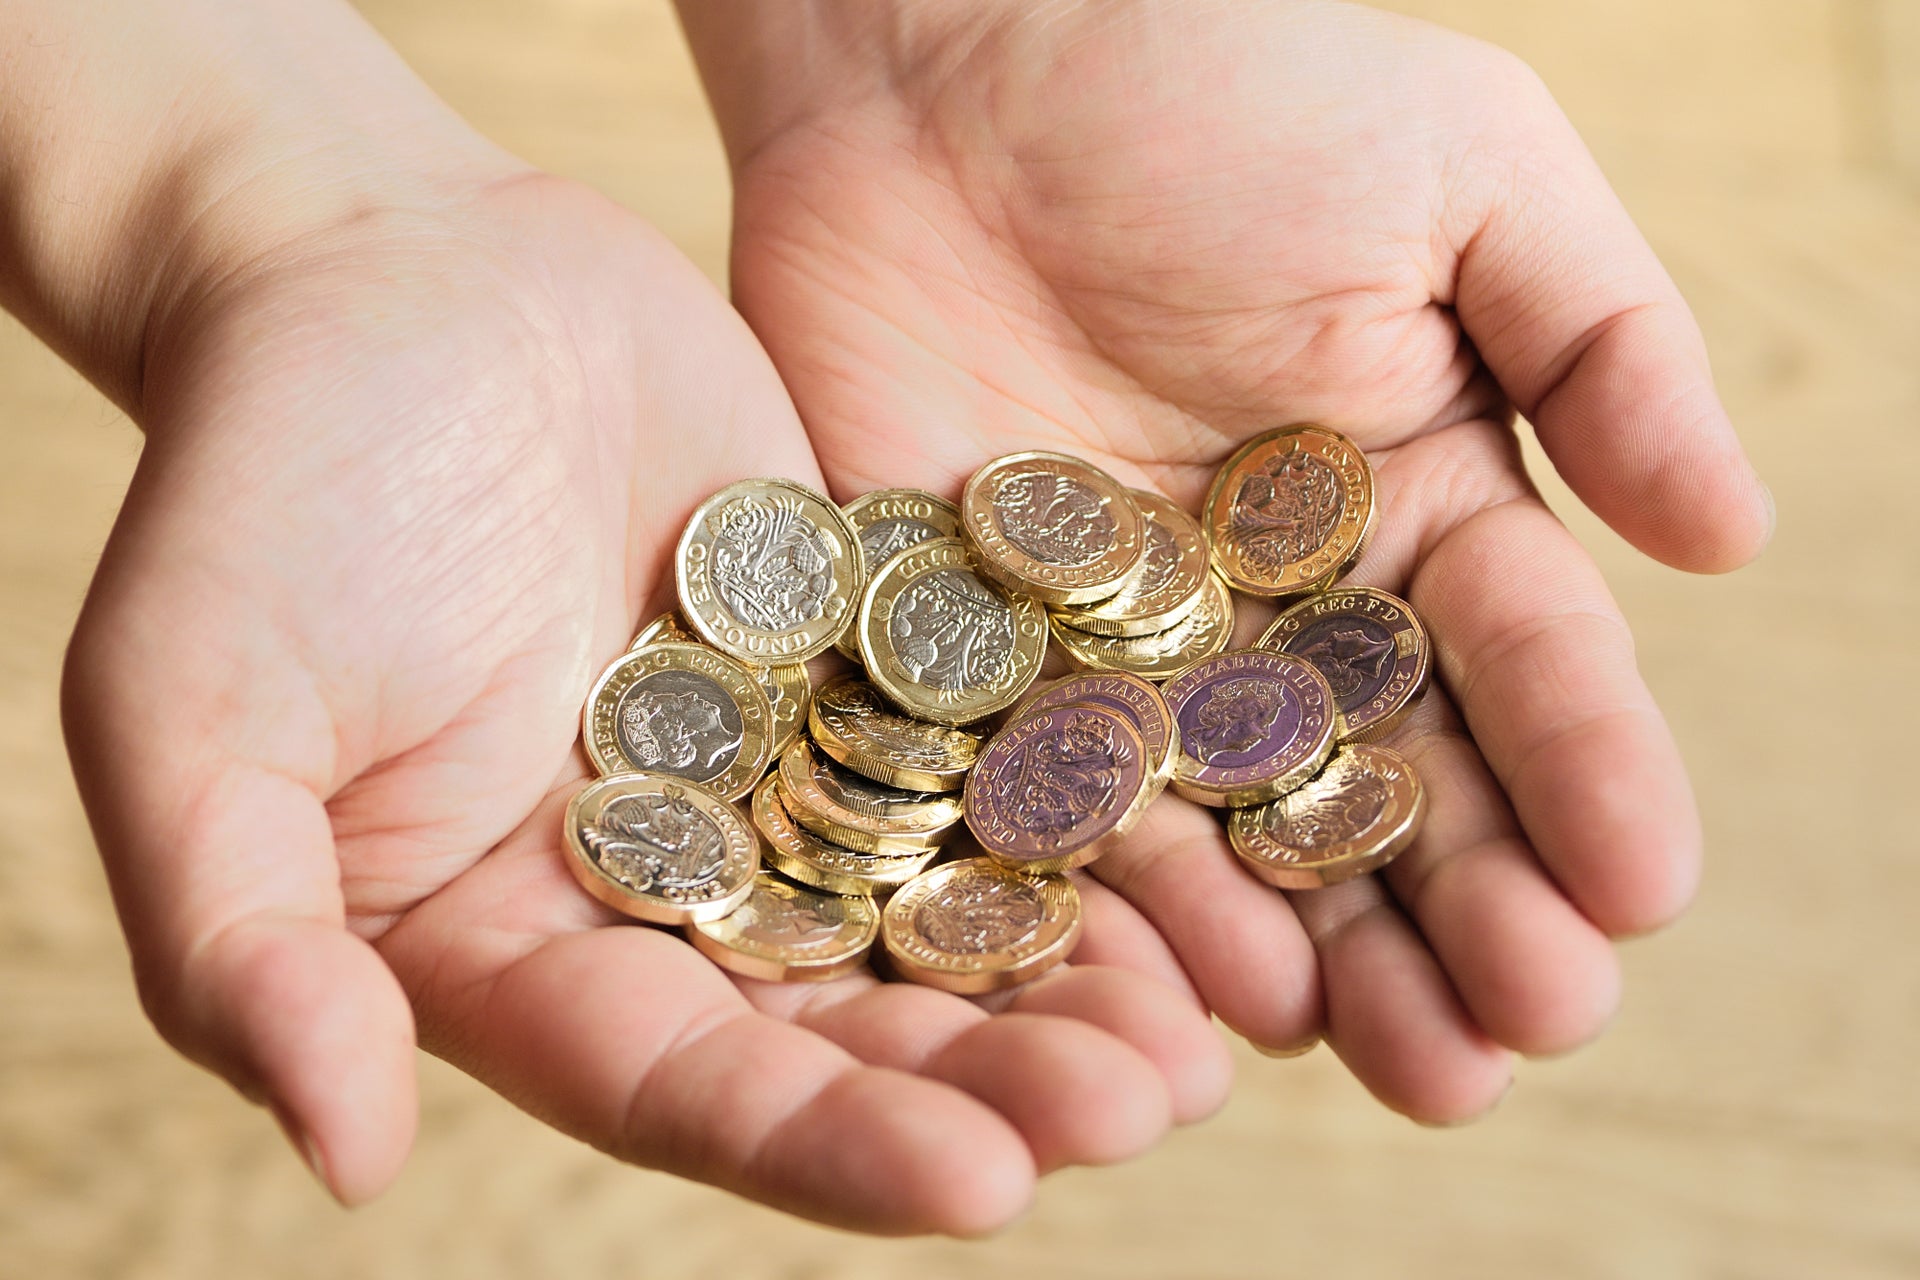 Two hands holding a collection of pound coins